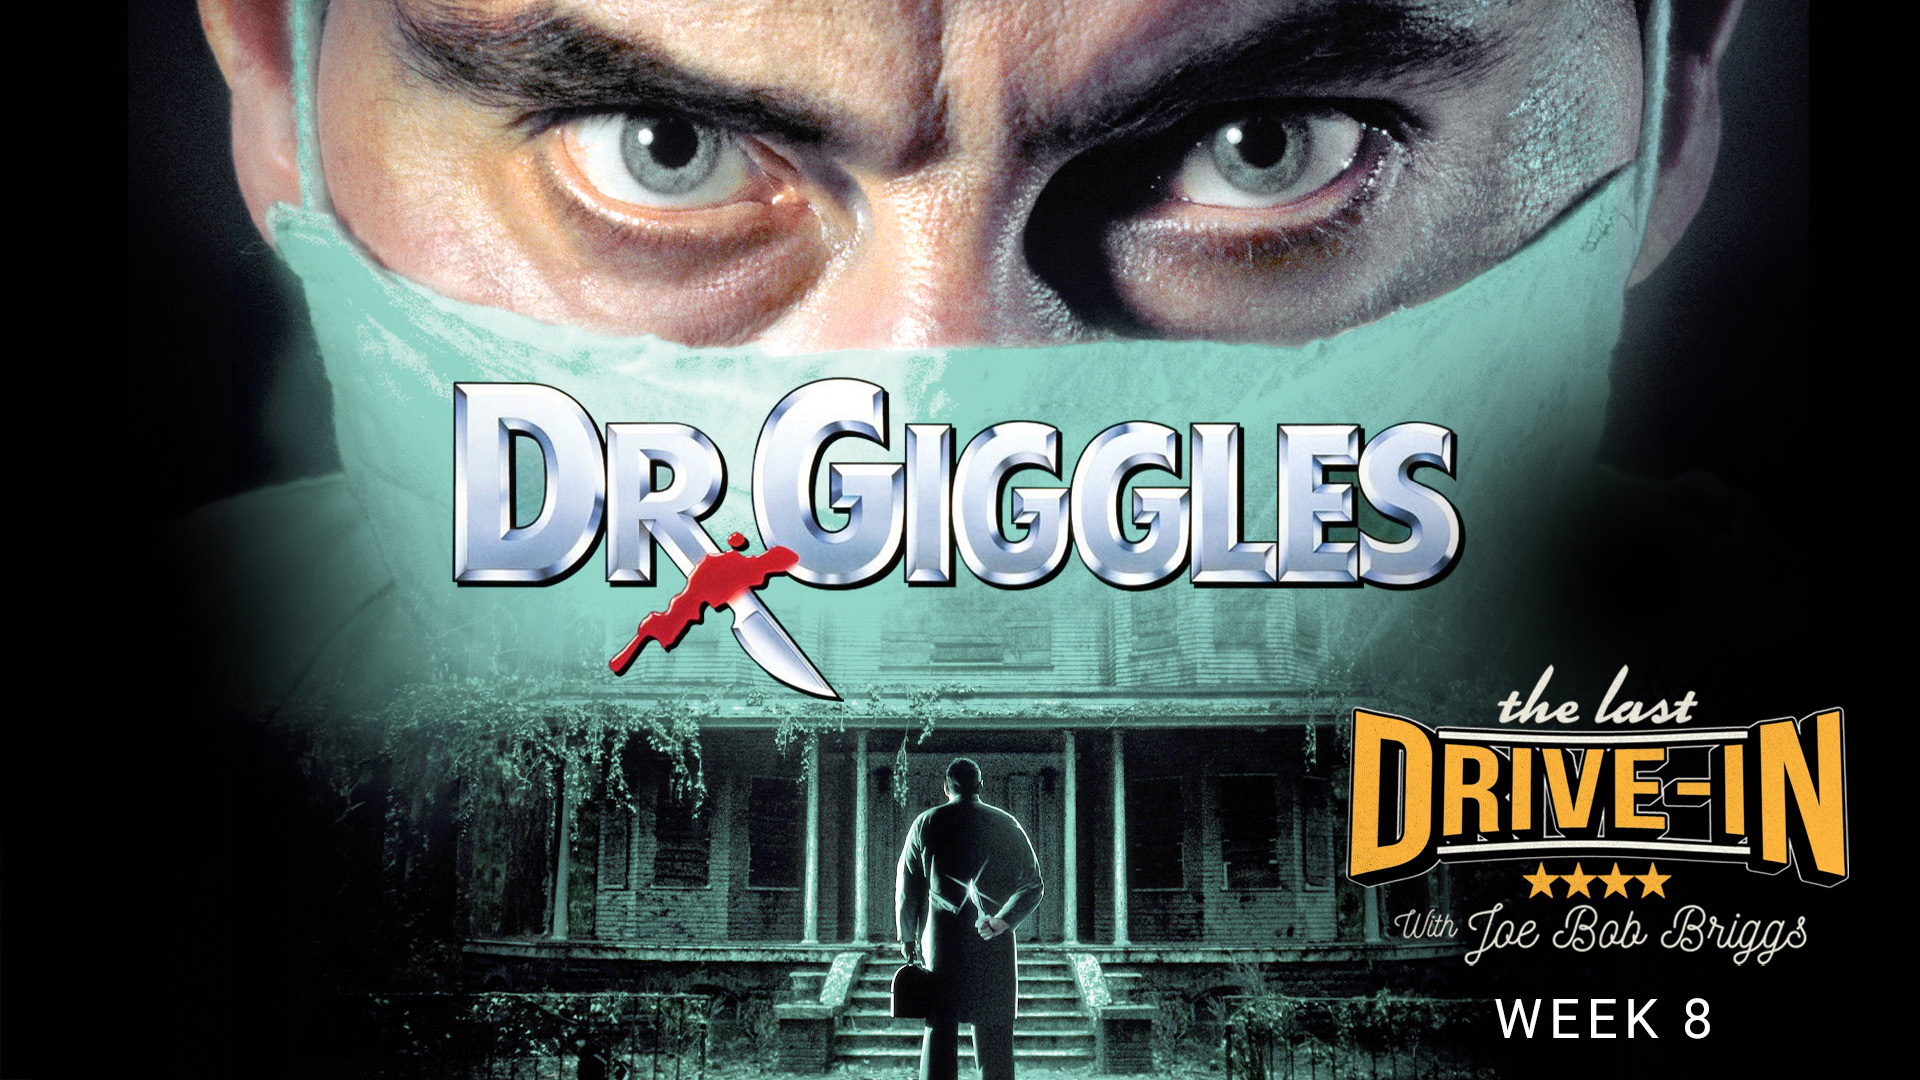 Dr. Giggles, A madman comes to the town where his father was killed., TV-MA, Season 1067704, Episode 8